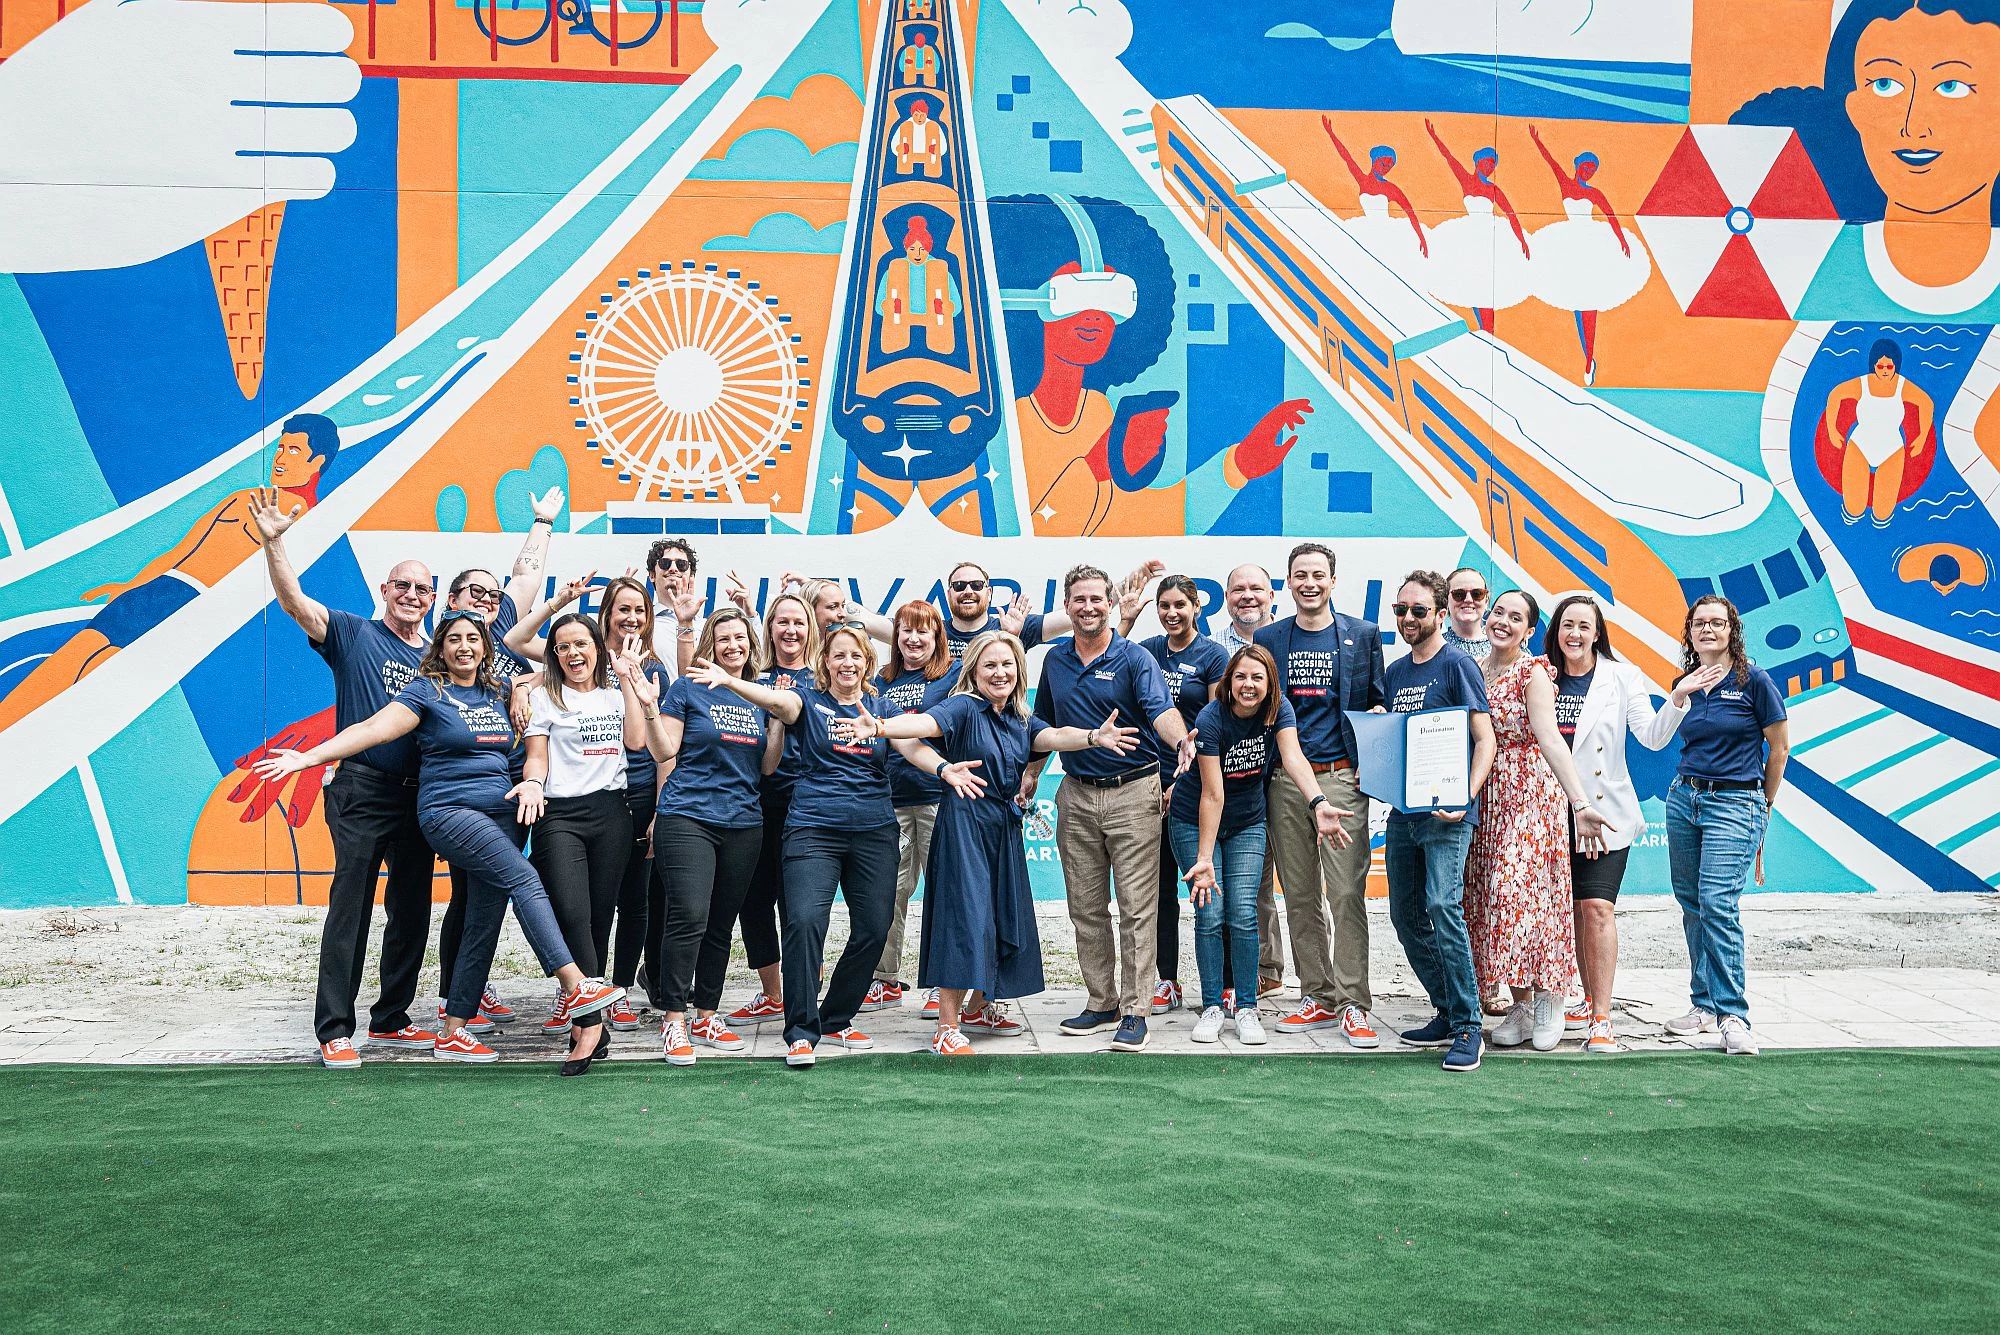 Visit Orlando team members and community members pictured at the Unbelievably Real mural in downtown Orlando. 